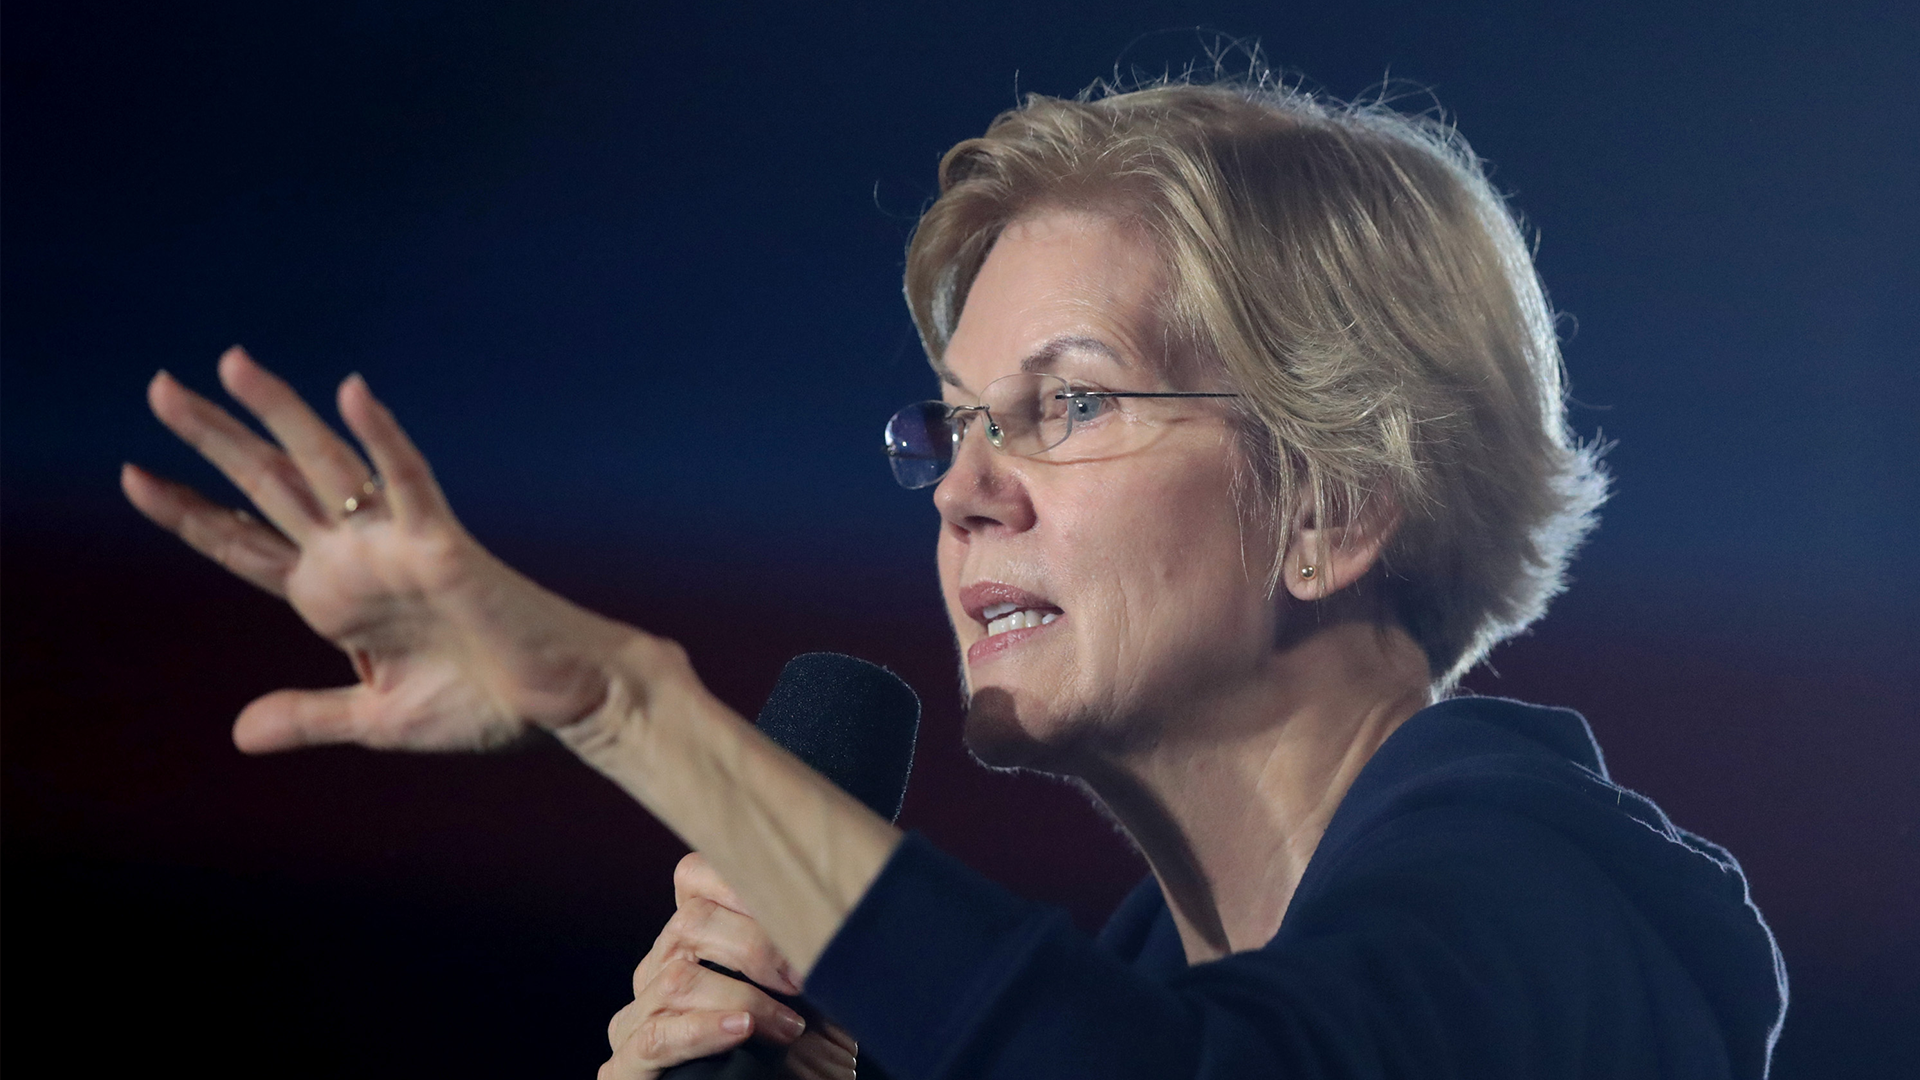 Warren blasts rivals for ultra-wealthy donors